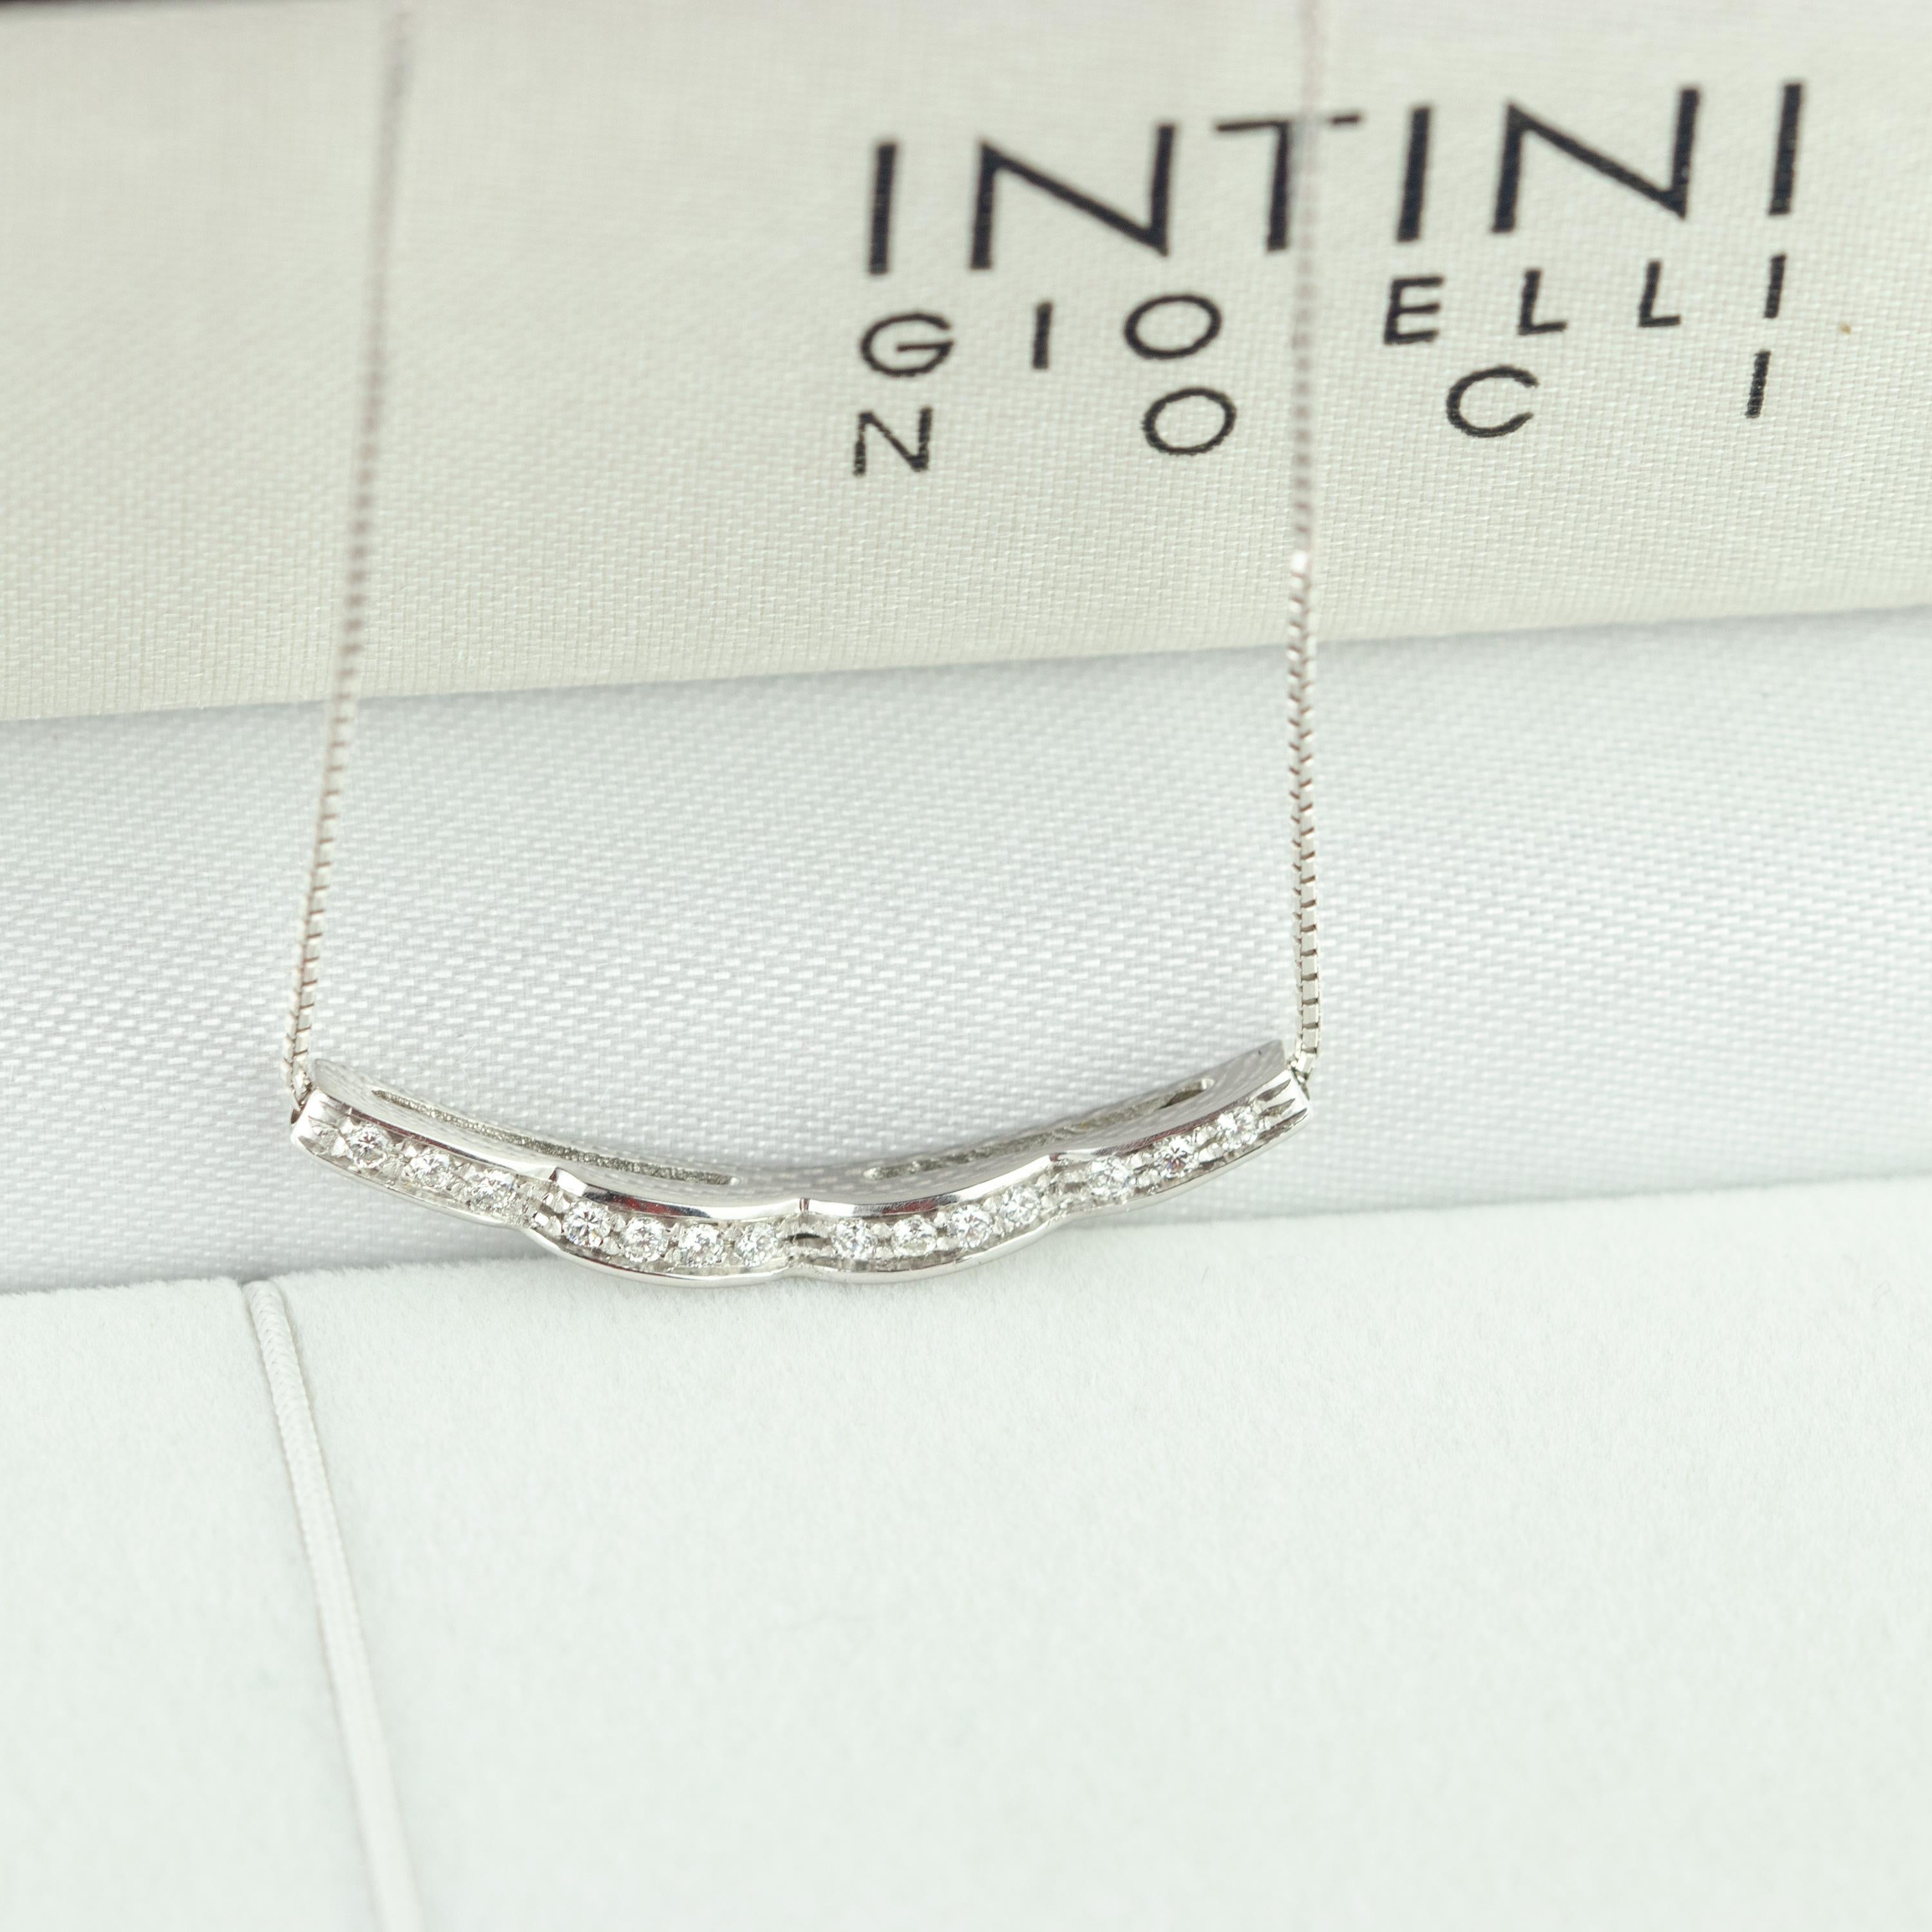 Stunning and marvelous linear curved horizontal diamond line pendant embellished by 18 karat carved white gold chain. Over 14 diamonds, 0.14 carat, create a line of gems crafted carefully to be as delicate as a royal jewel. A magnificent bar chain